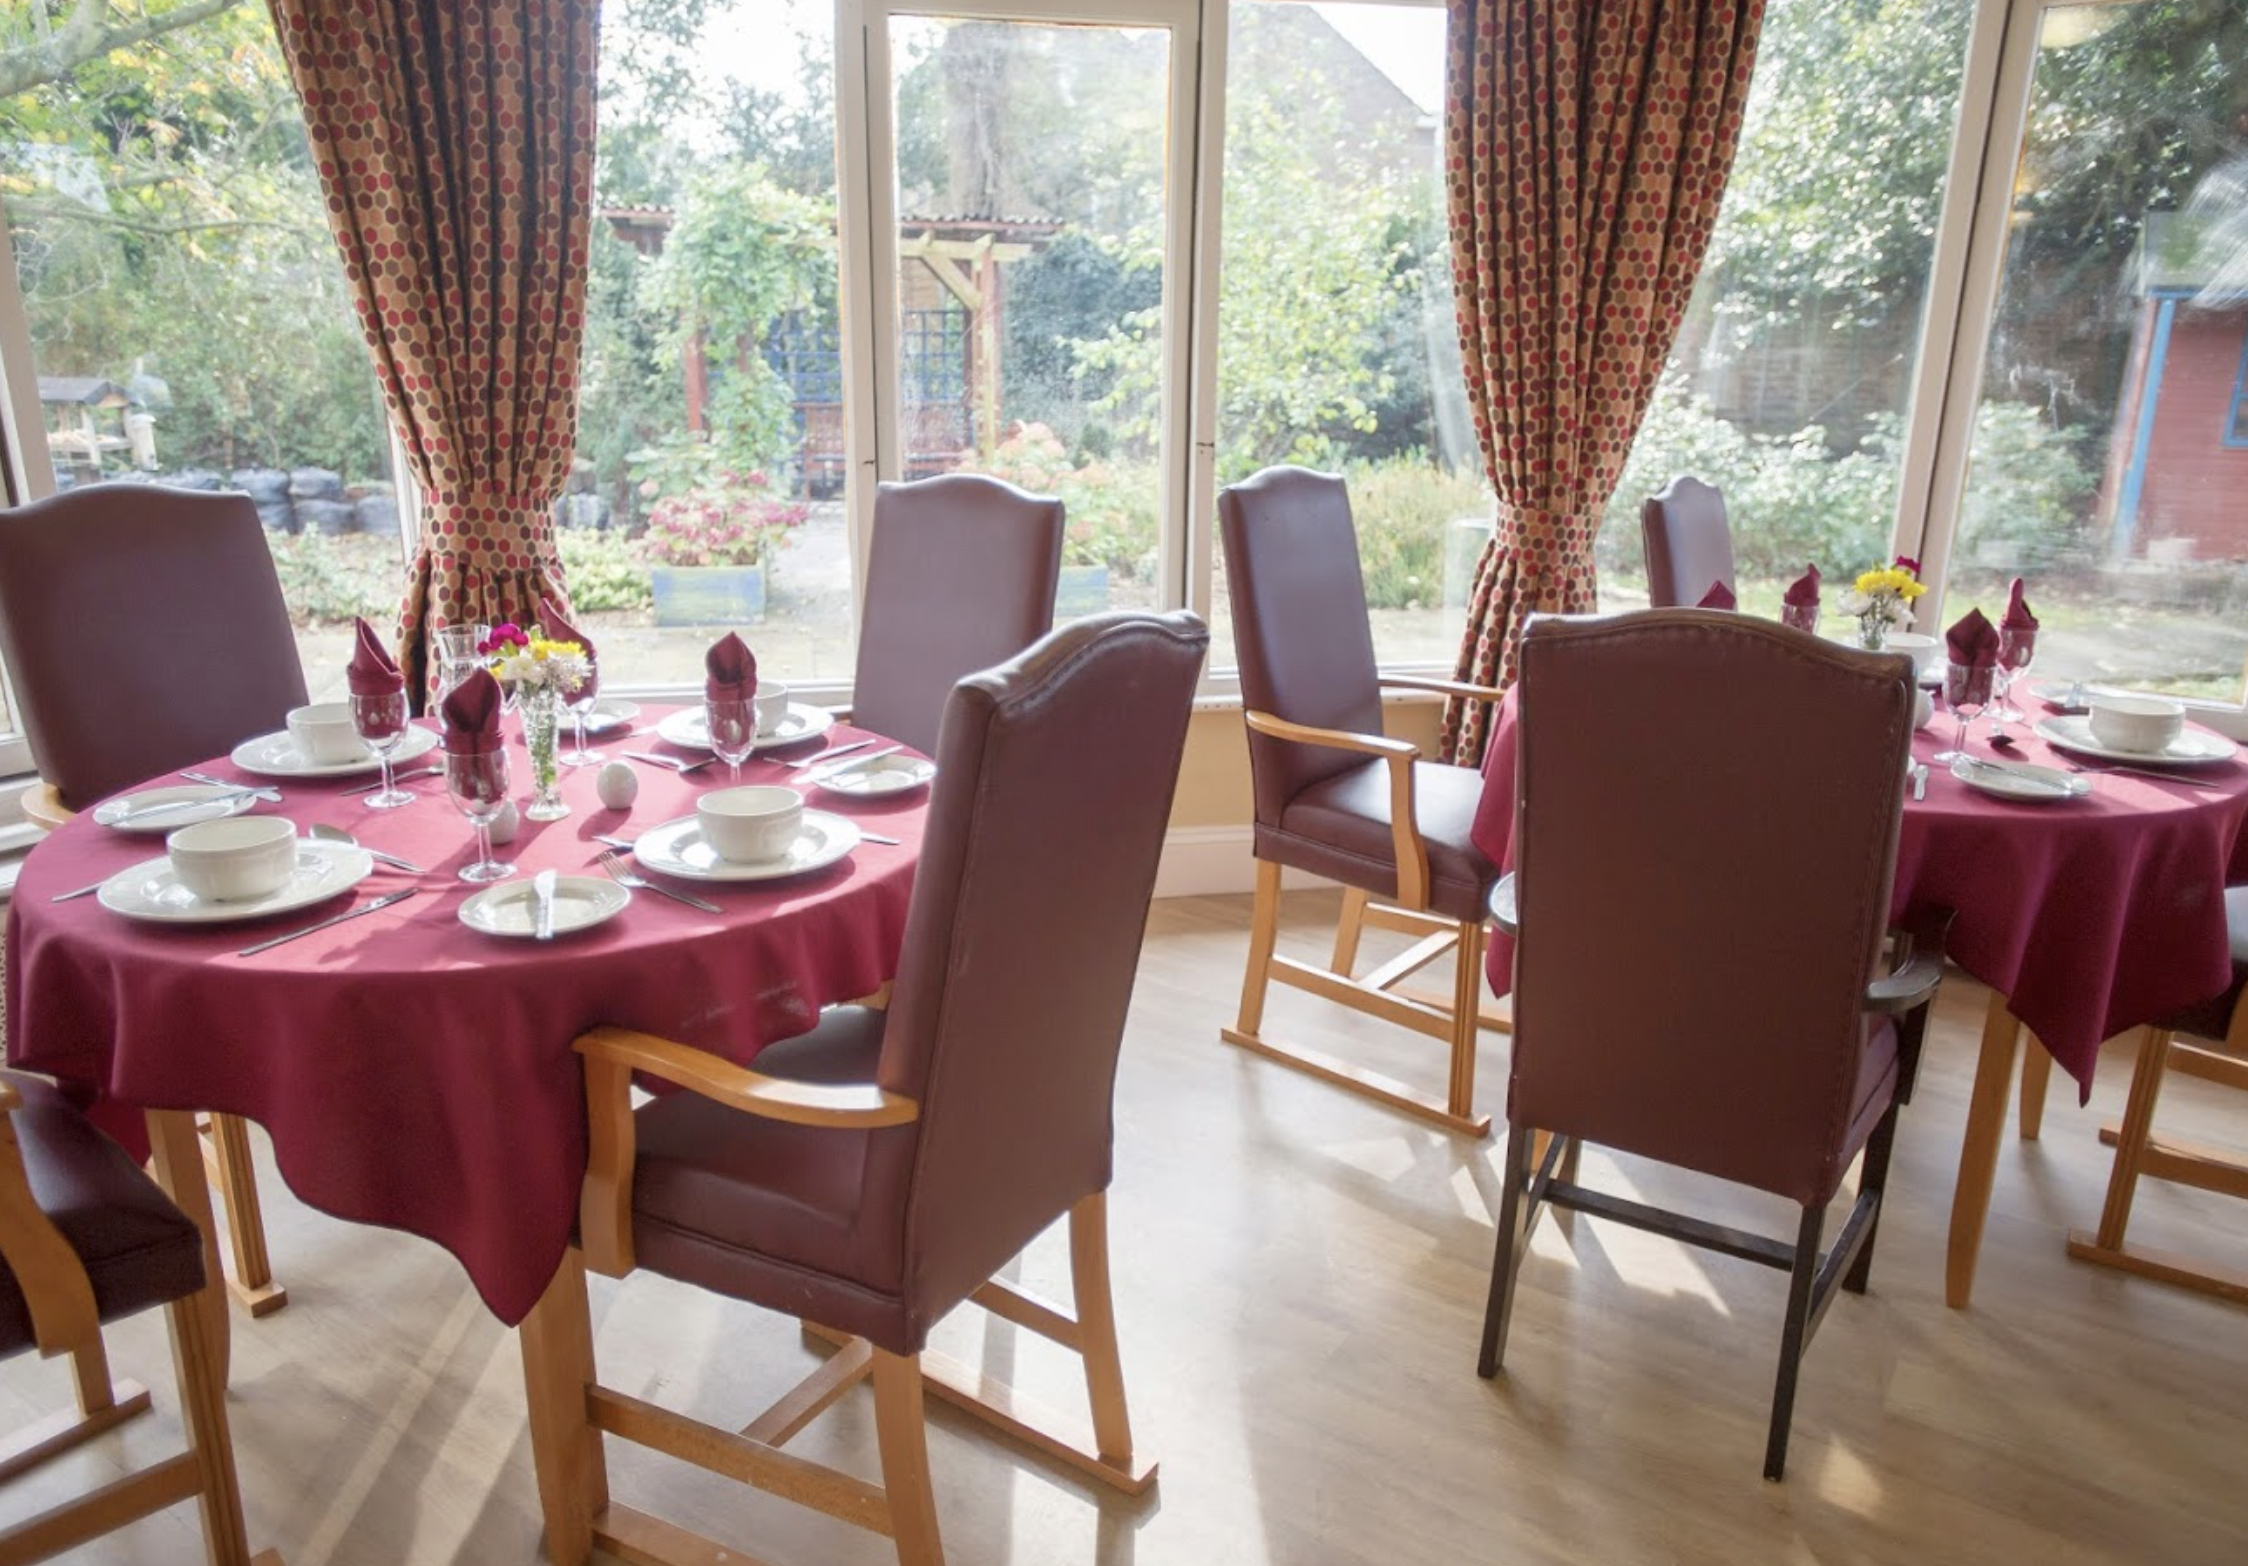 Dining room of Wilmington Manor care home in Dartford, Kent